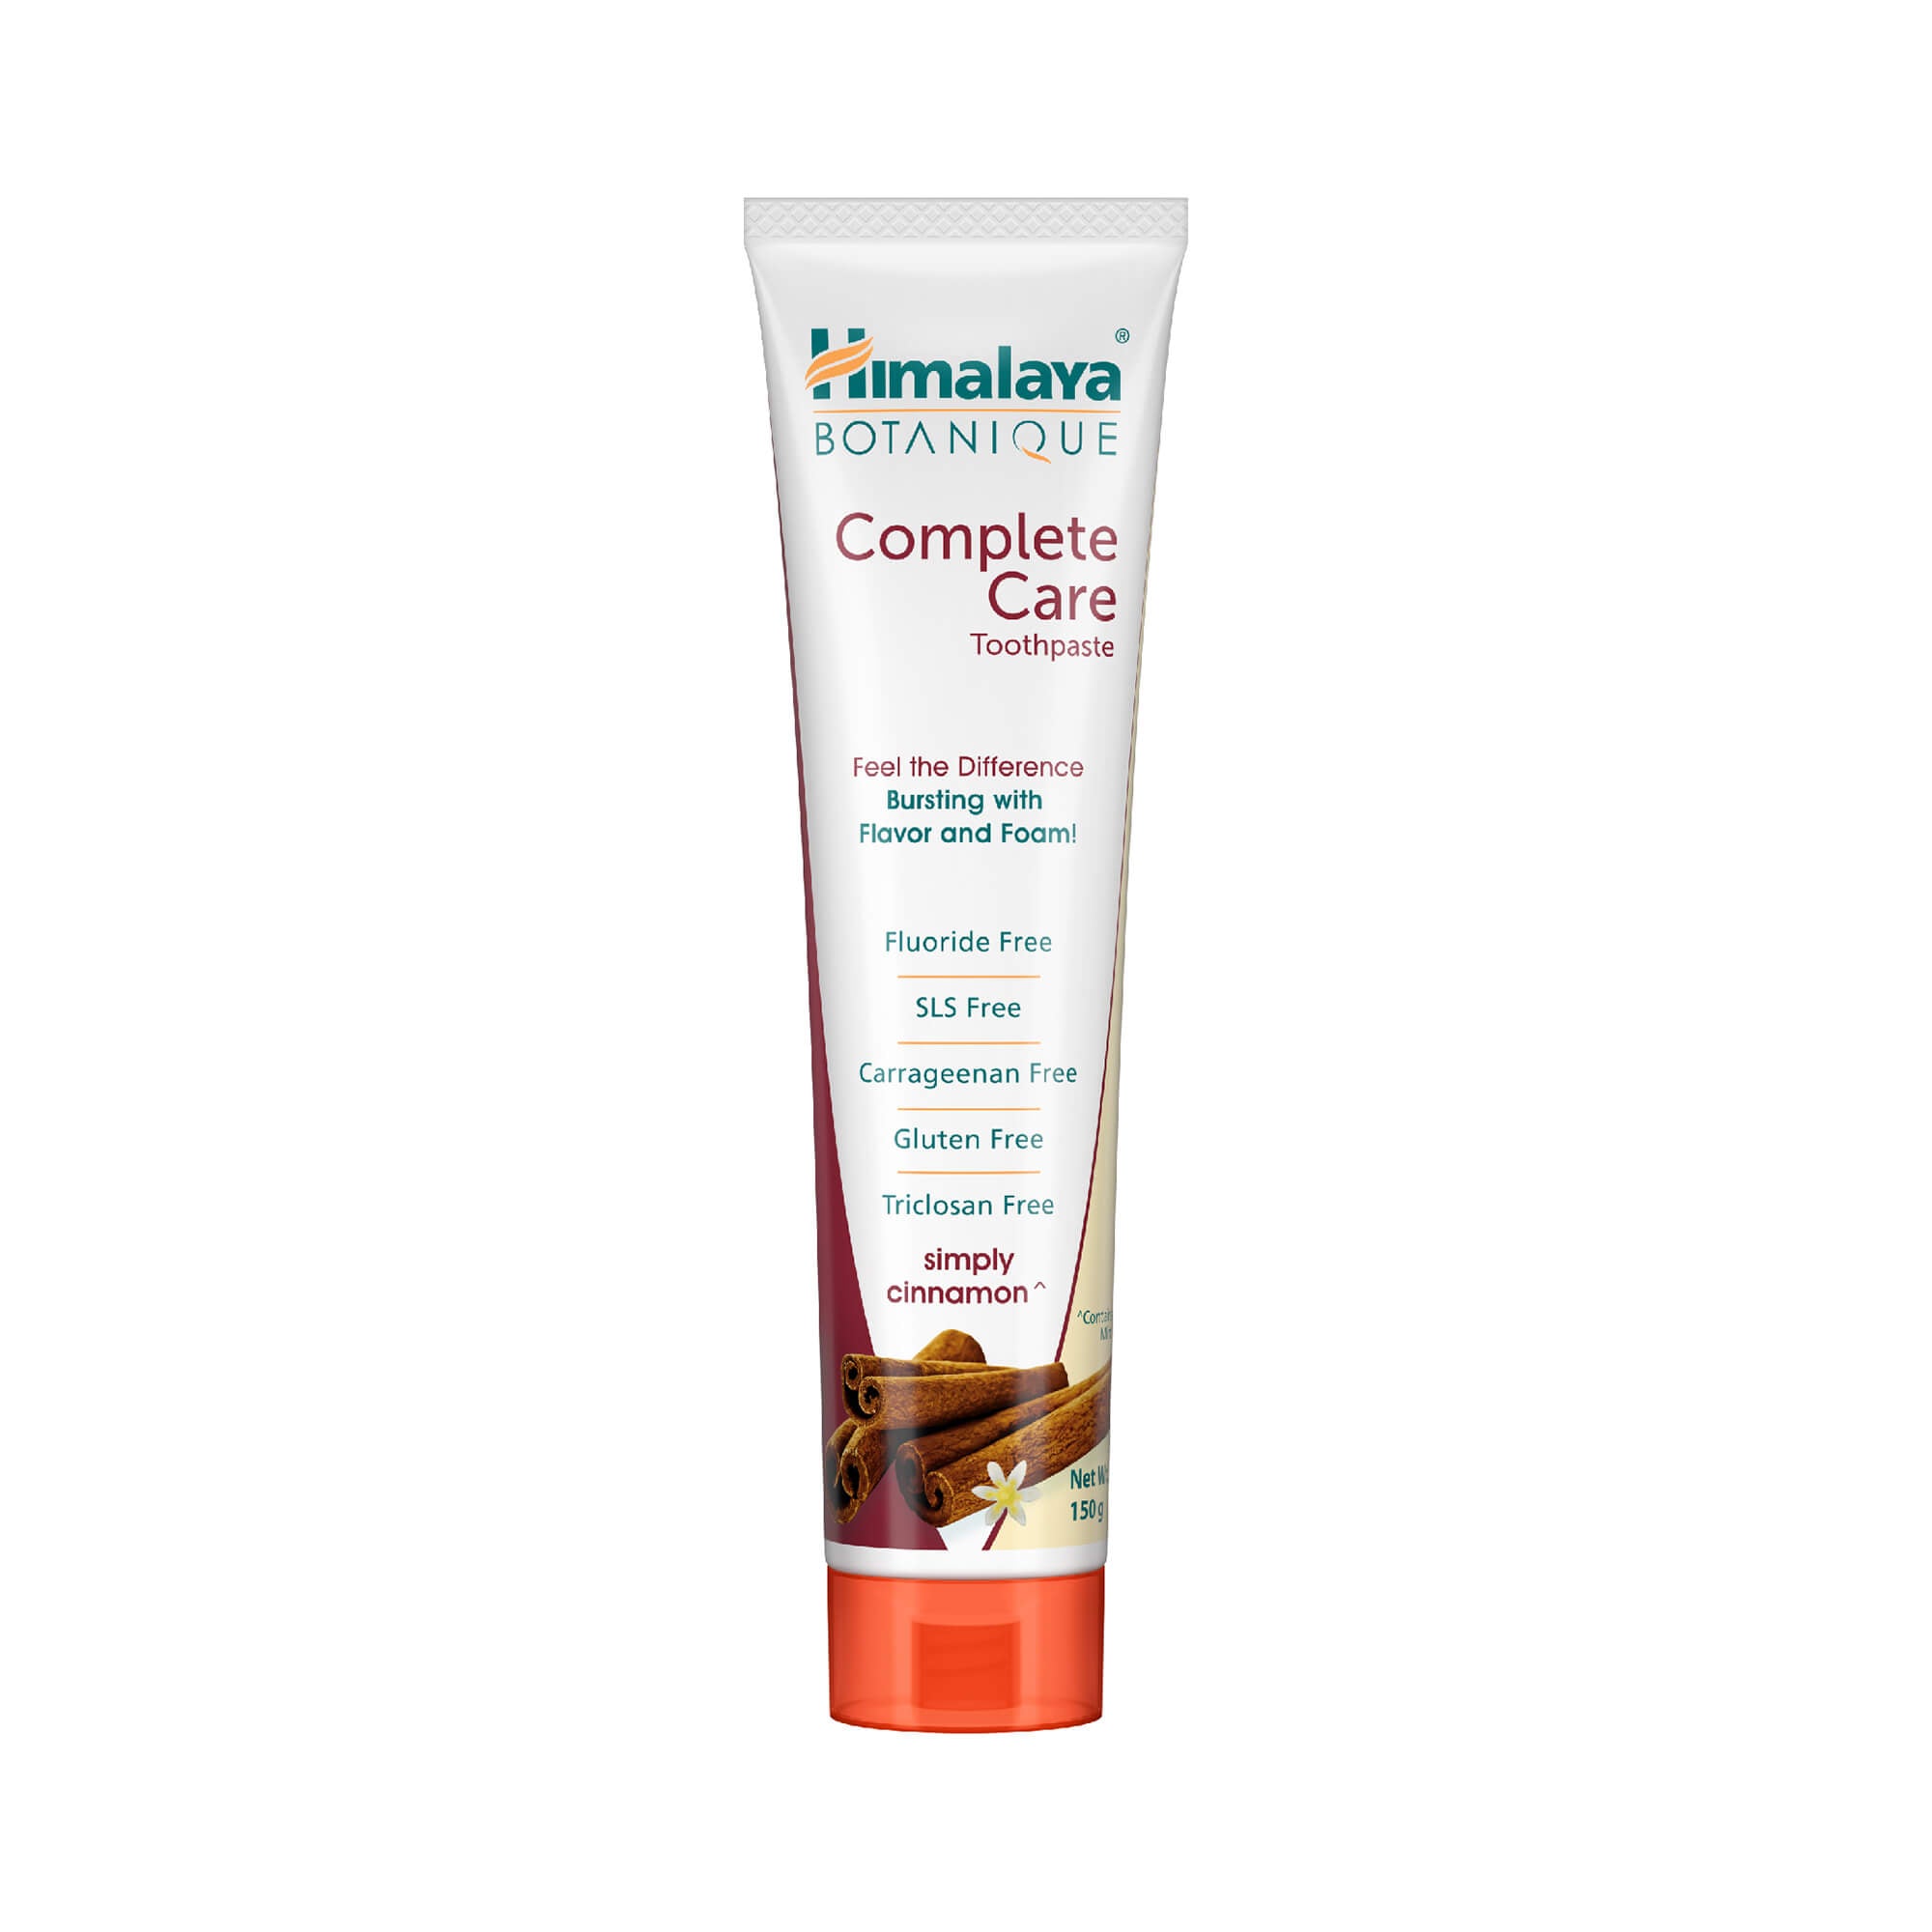  Himalaya BOTANIQUE Complete Care Toothpaste (Simply Cinnamon) 150g